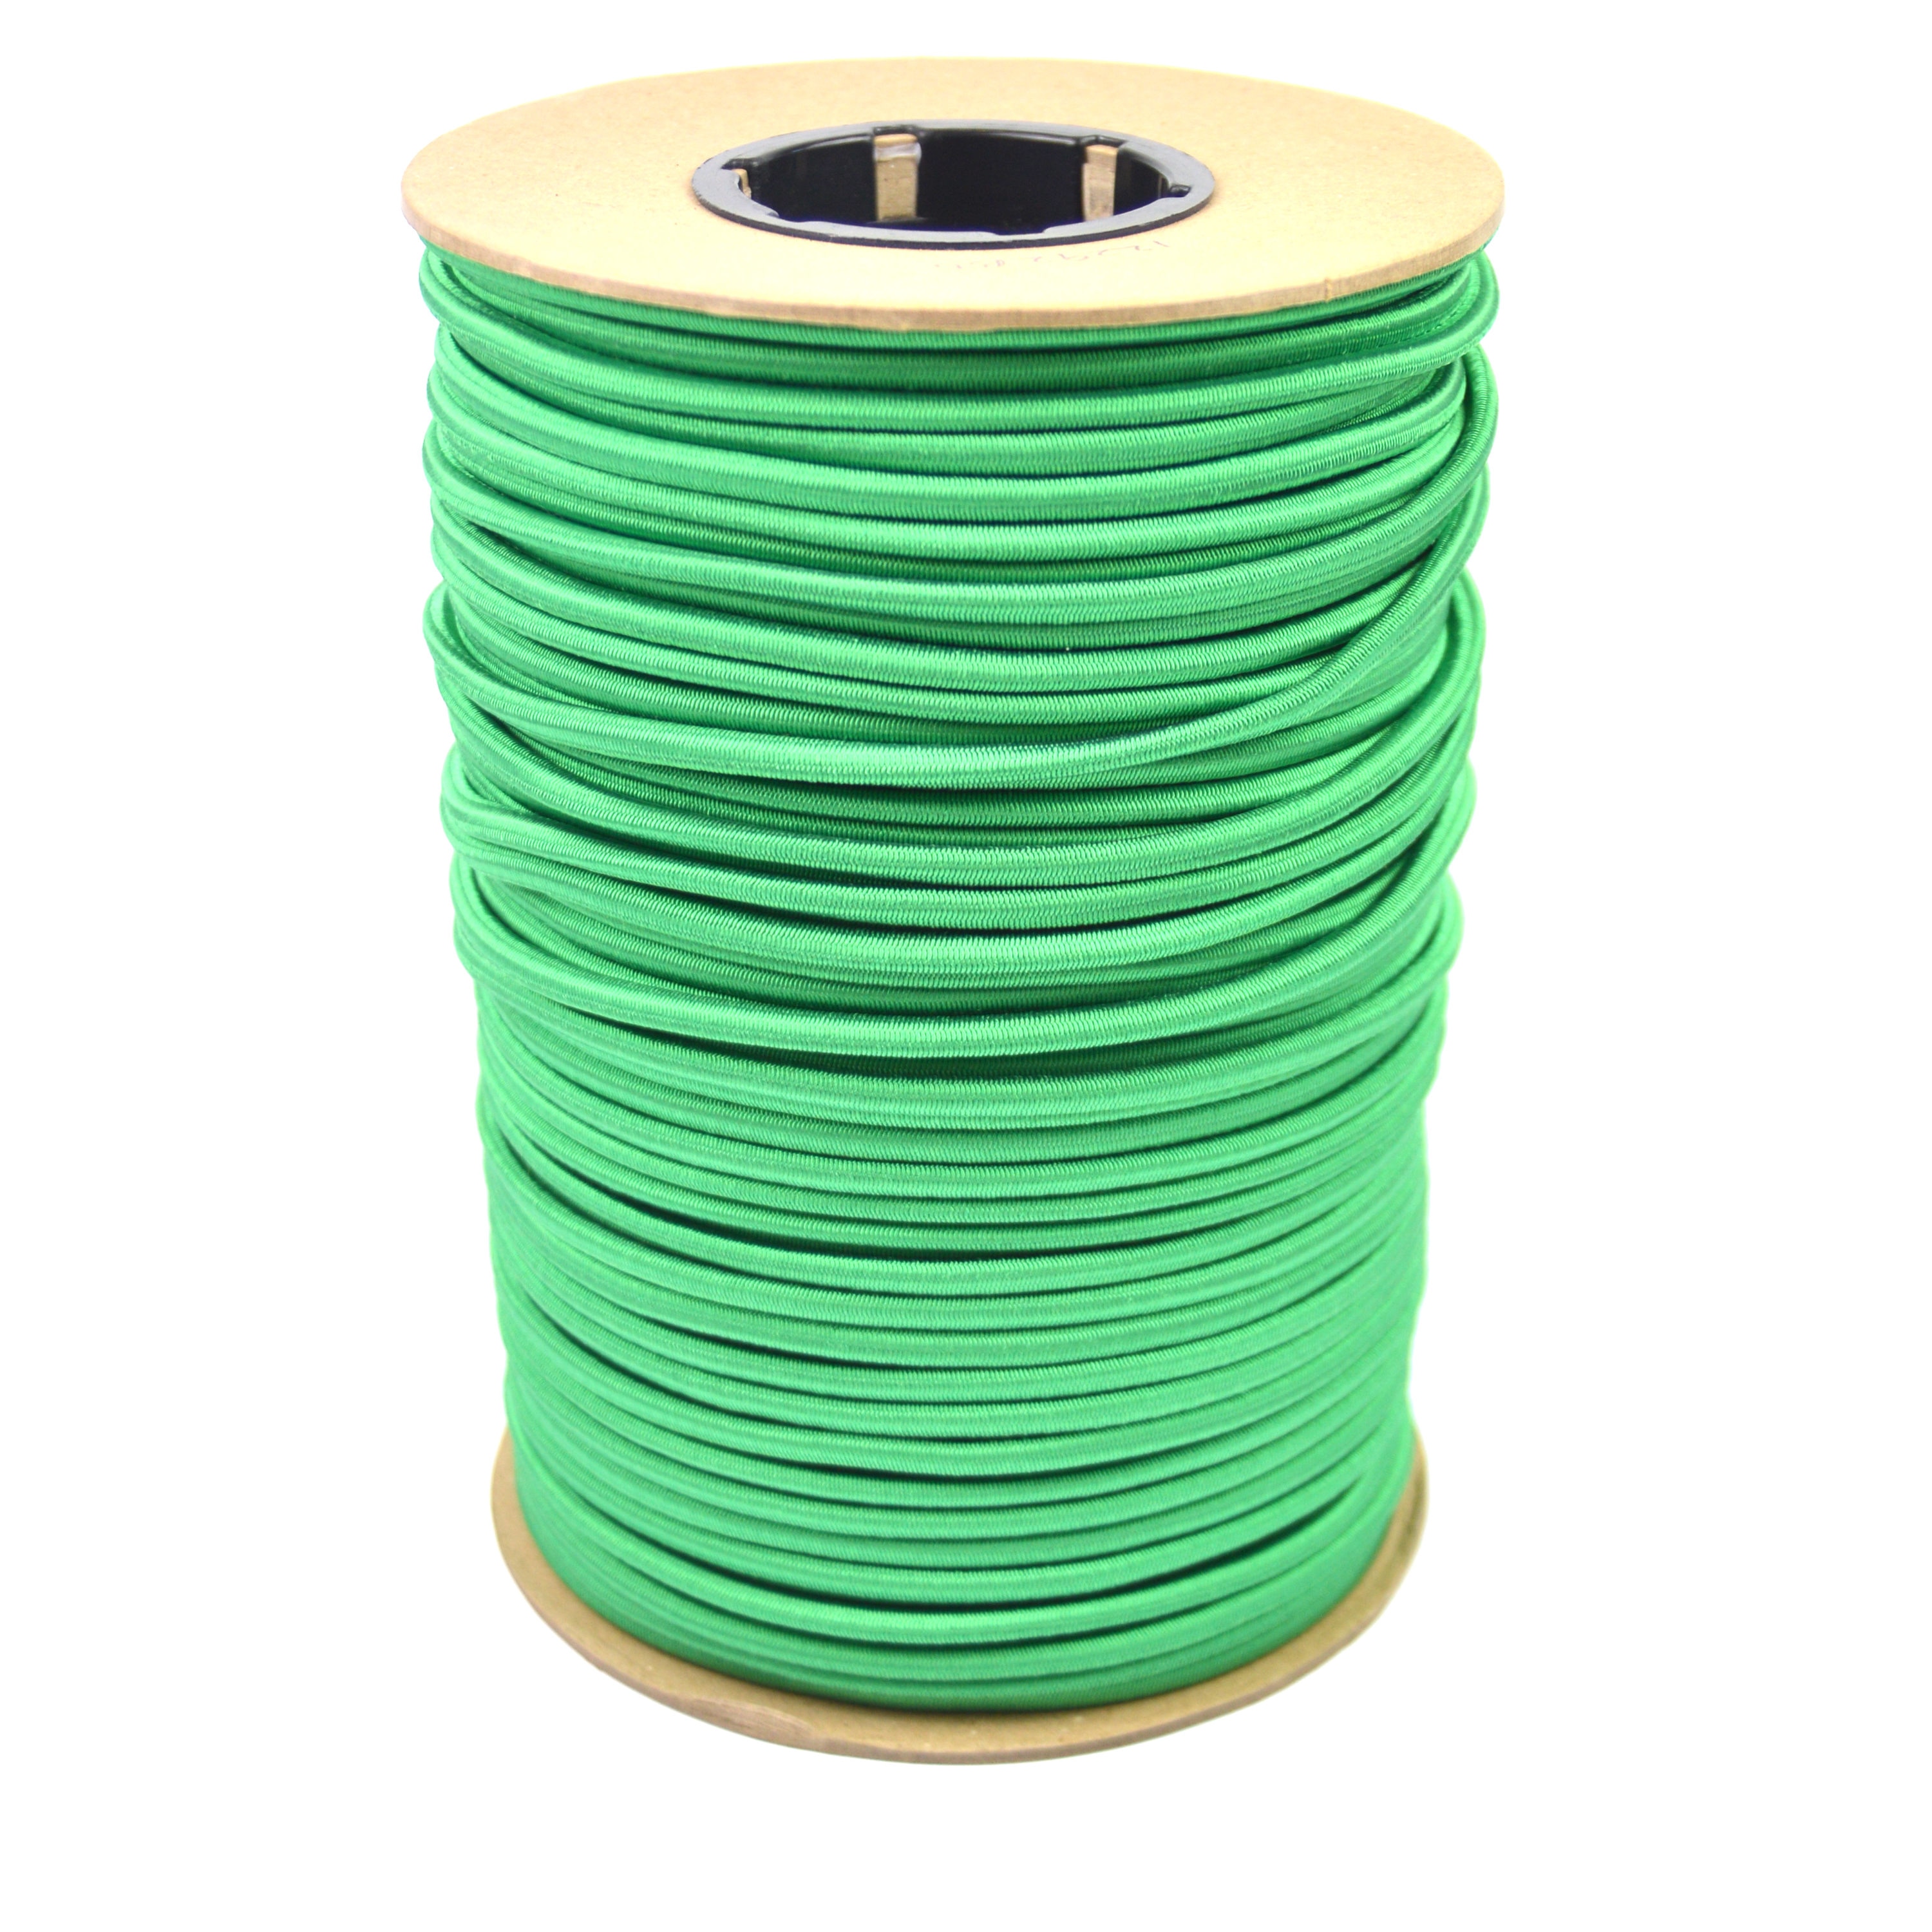 100ft 1/4" Green Shock Cord Marine Grade Bungee Heavy Duty Tie Down Stretch Rope 